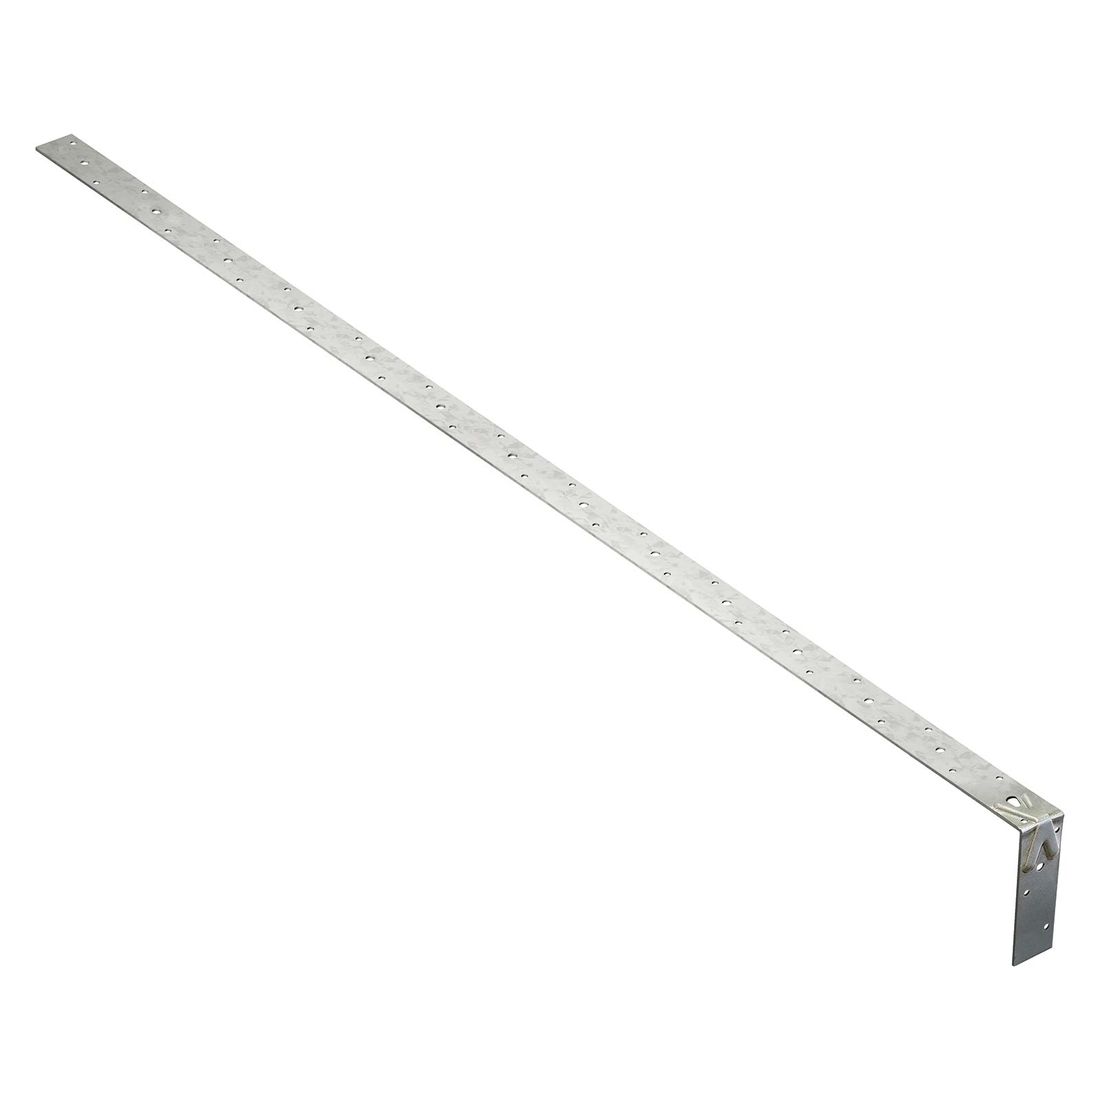 Engineered Strap Heavy Duty 1000Mm Overall Bent 100Mm